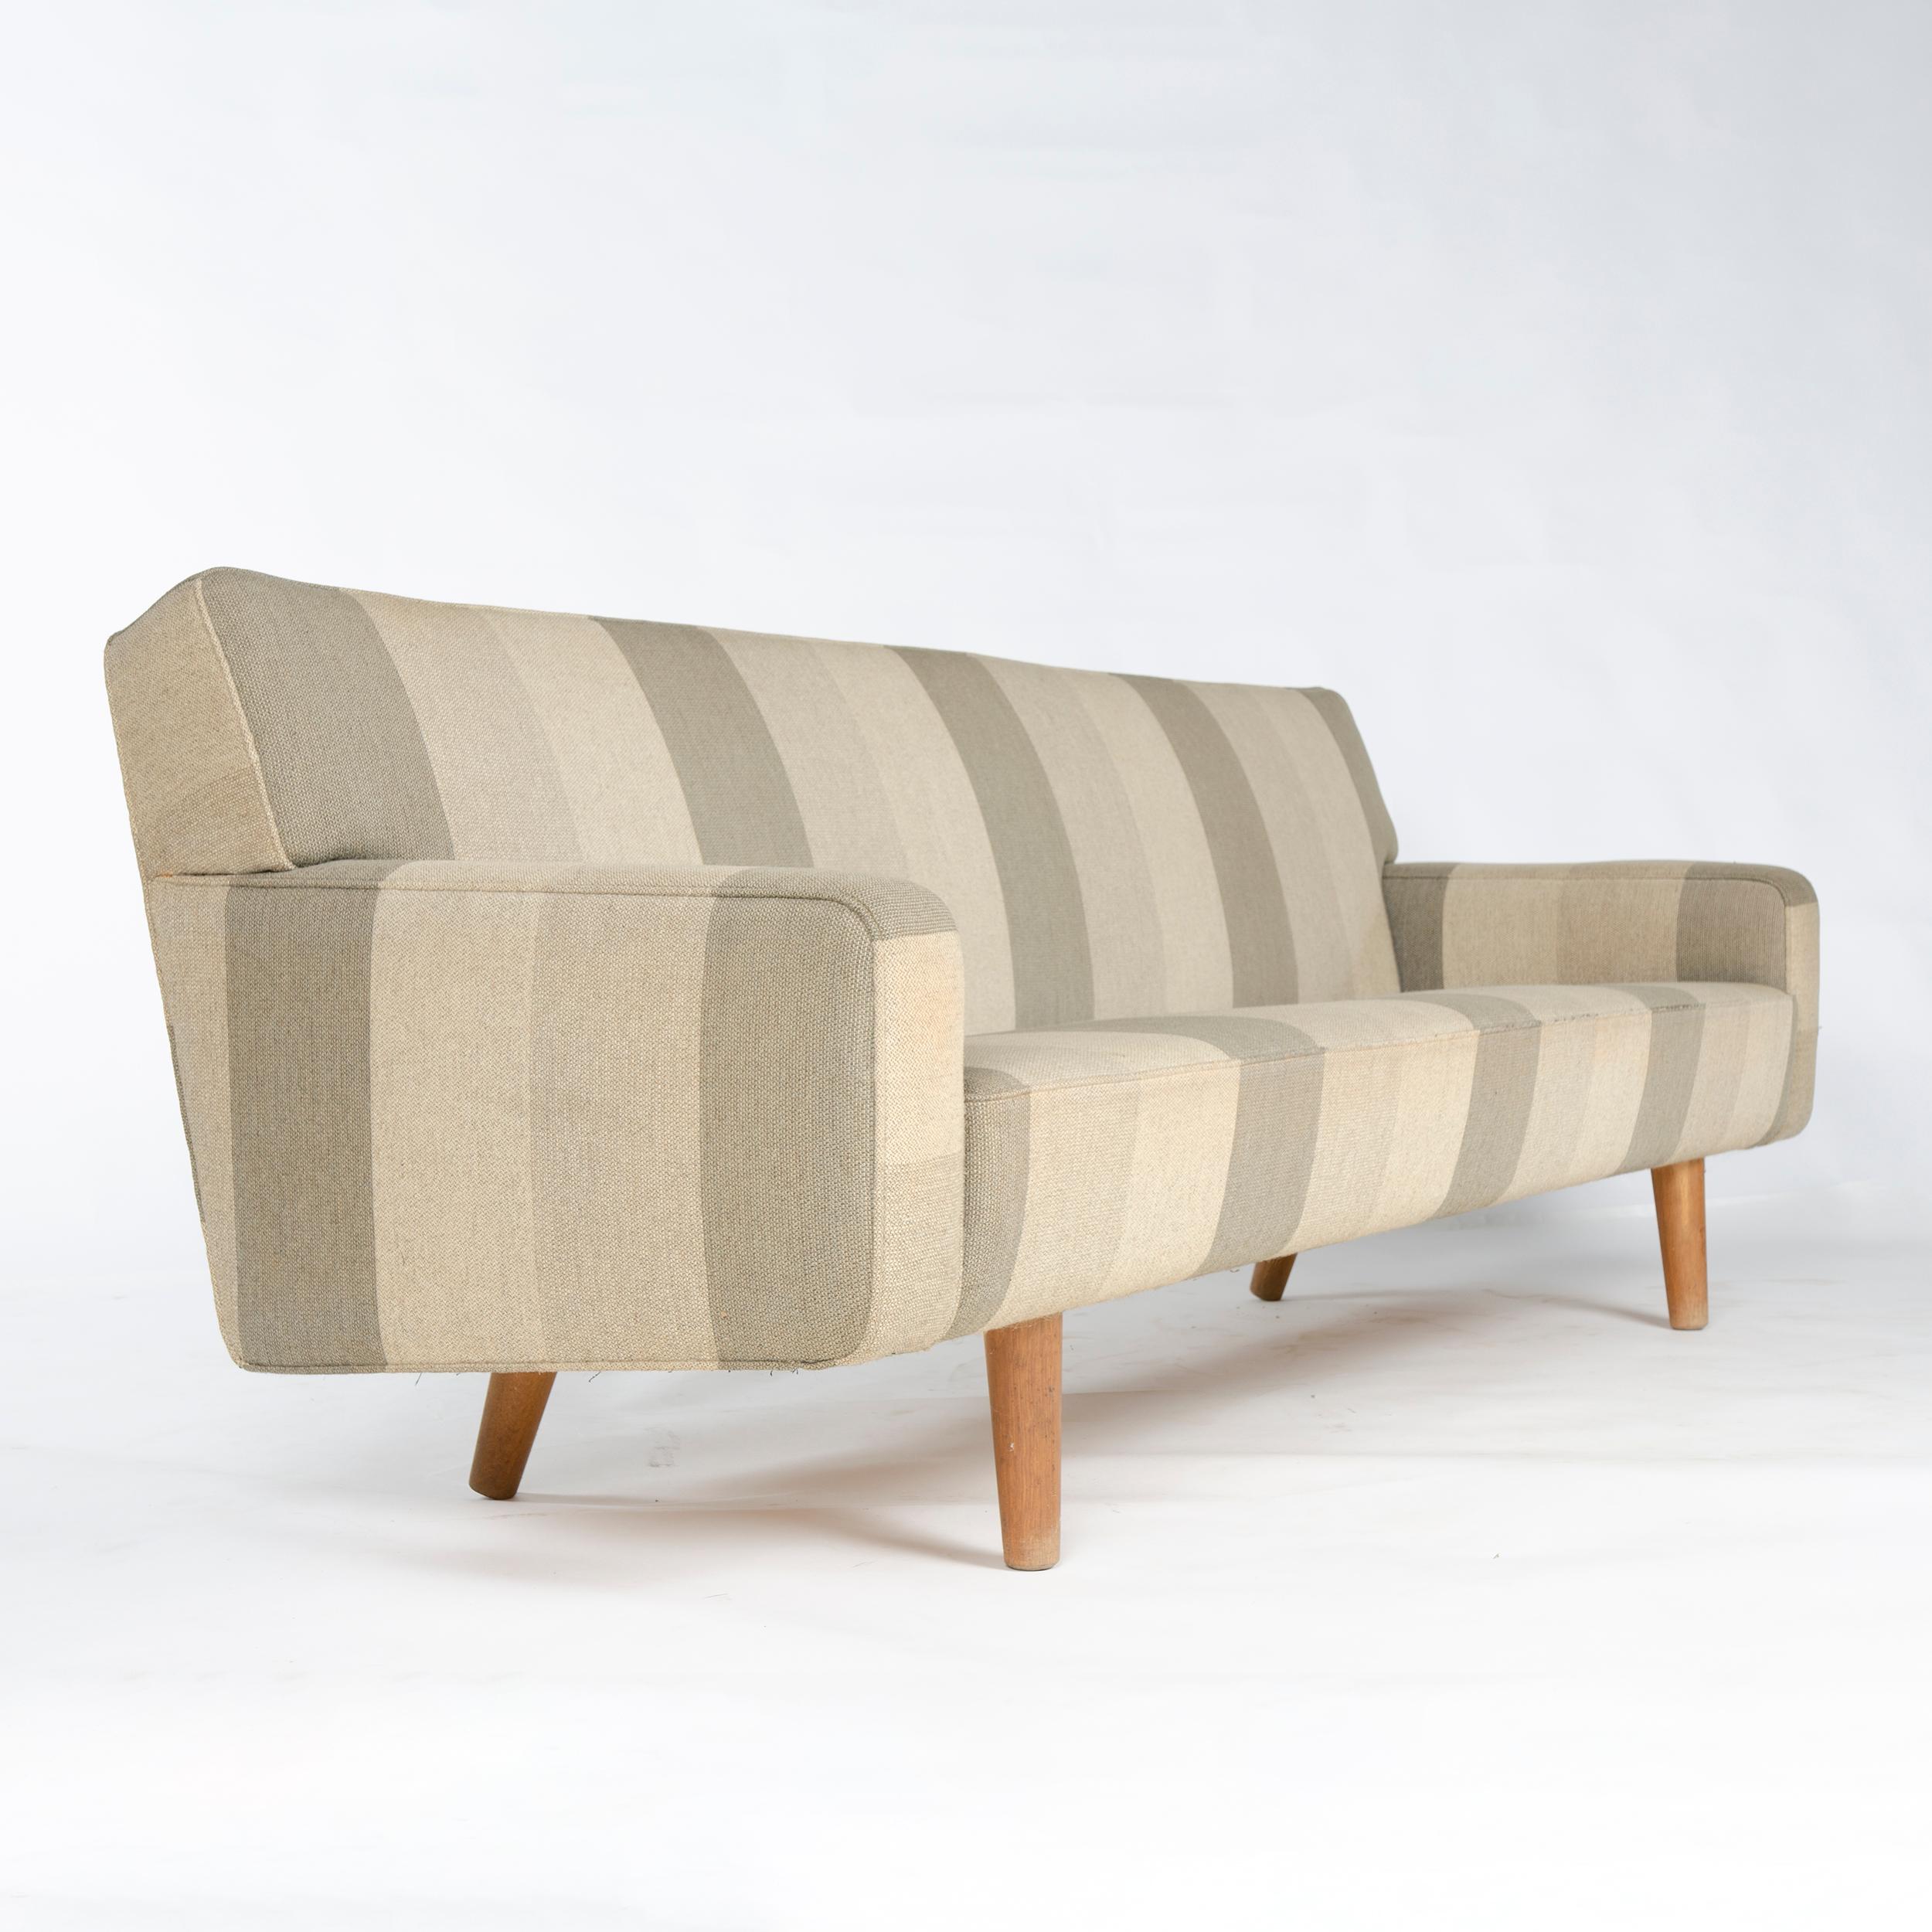 A tailored and fully upholstered sofa floating on well-scaled turned oak dowel legs. Model AP32-S by Hans J. Wegner for A.P. Stolen in original upholstery.